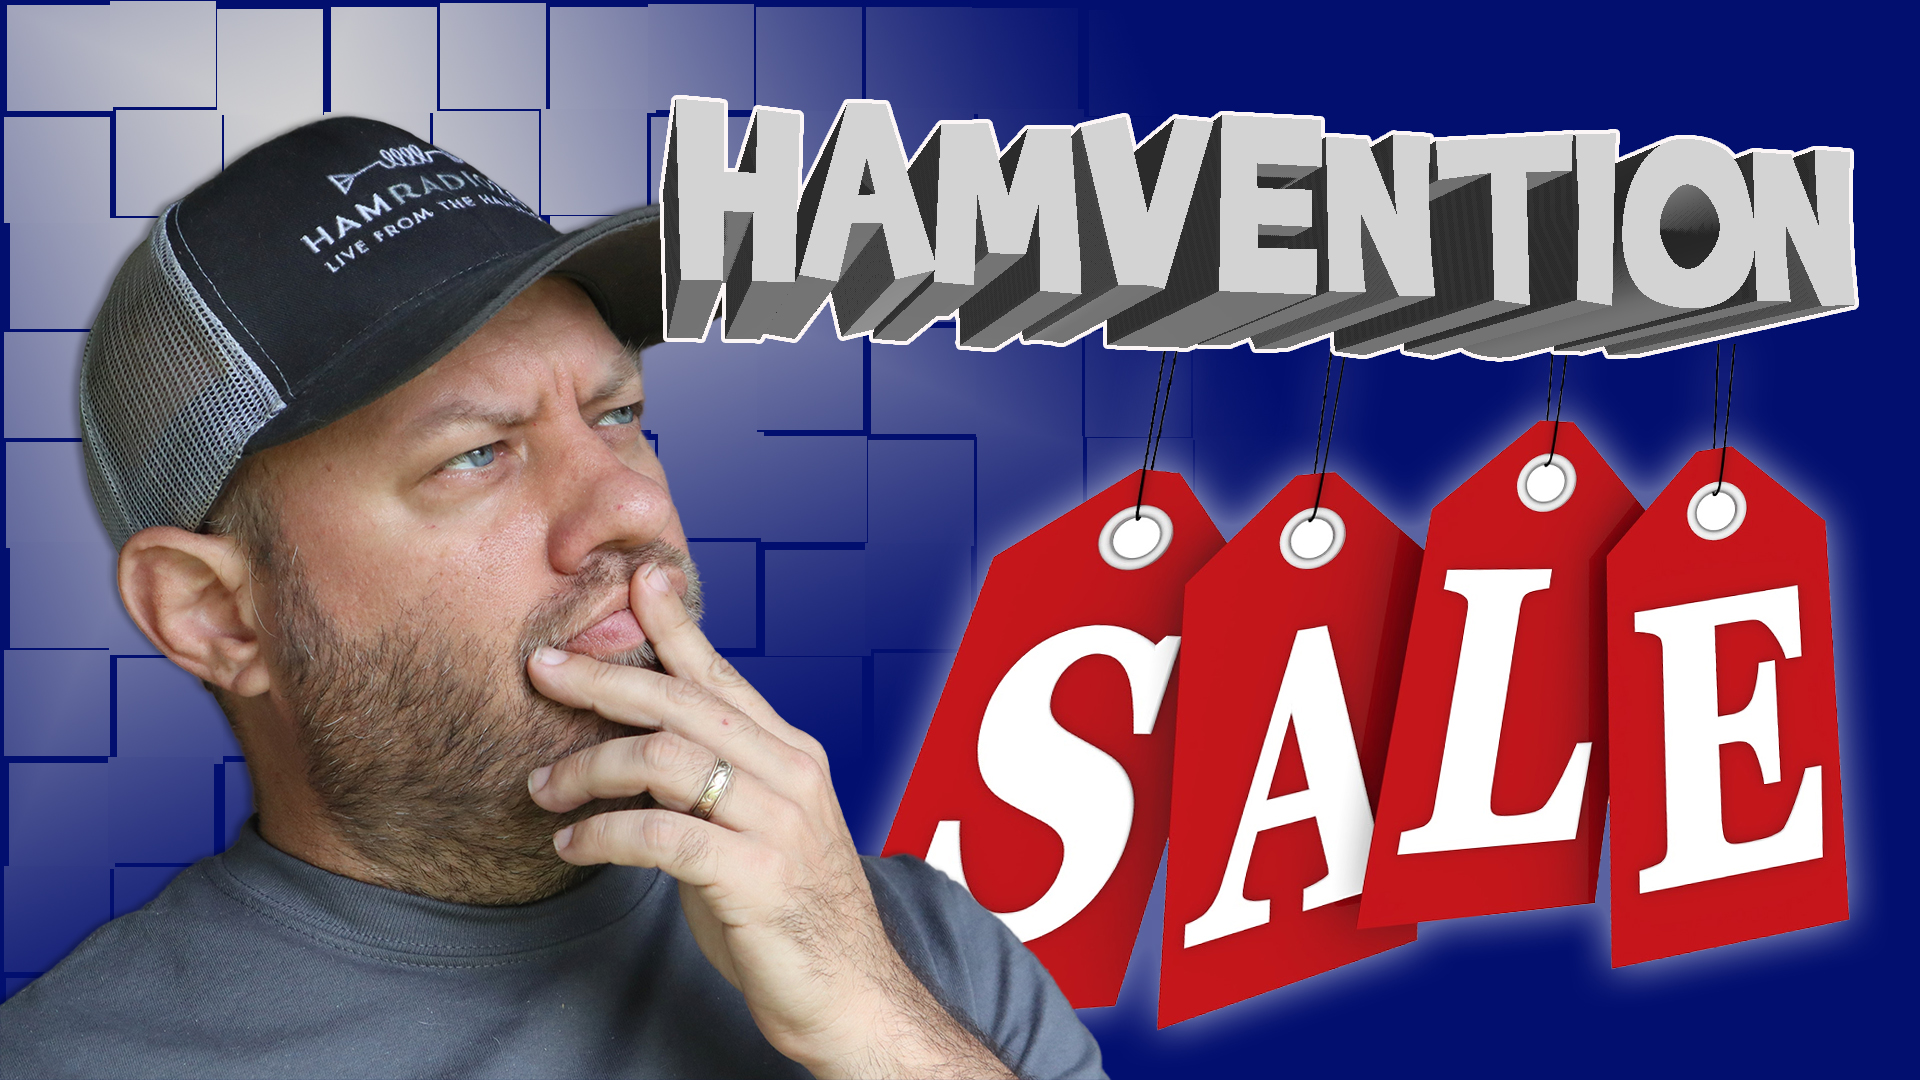 Episode 373: Ham Radio Shopping Deals for HAMVENTION Weekend, May 15th